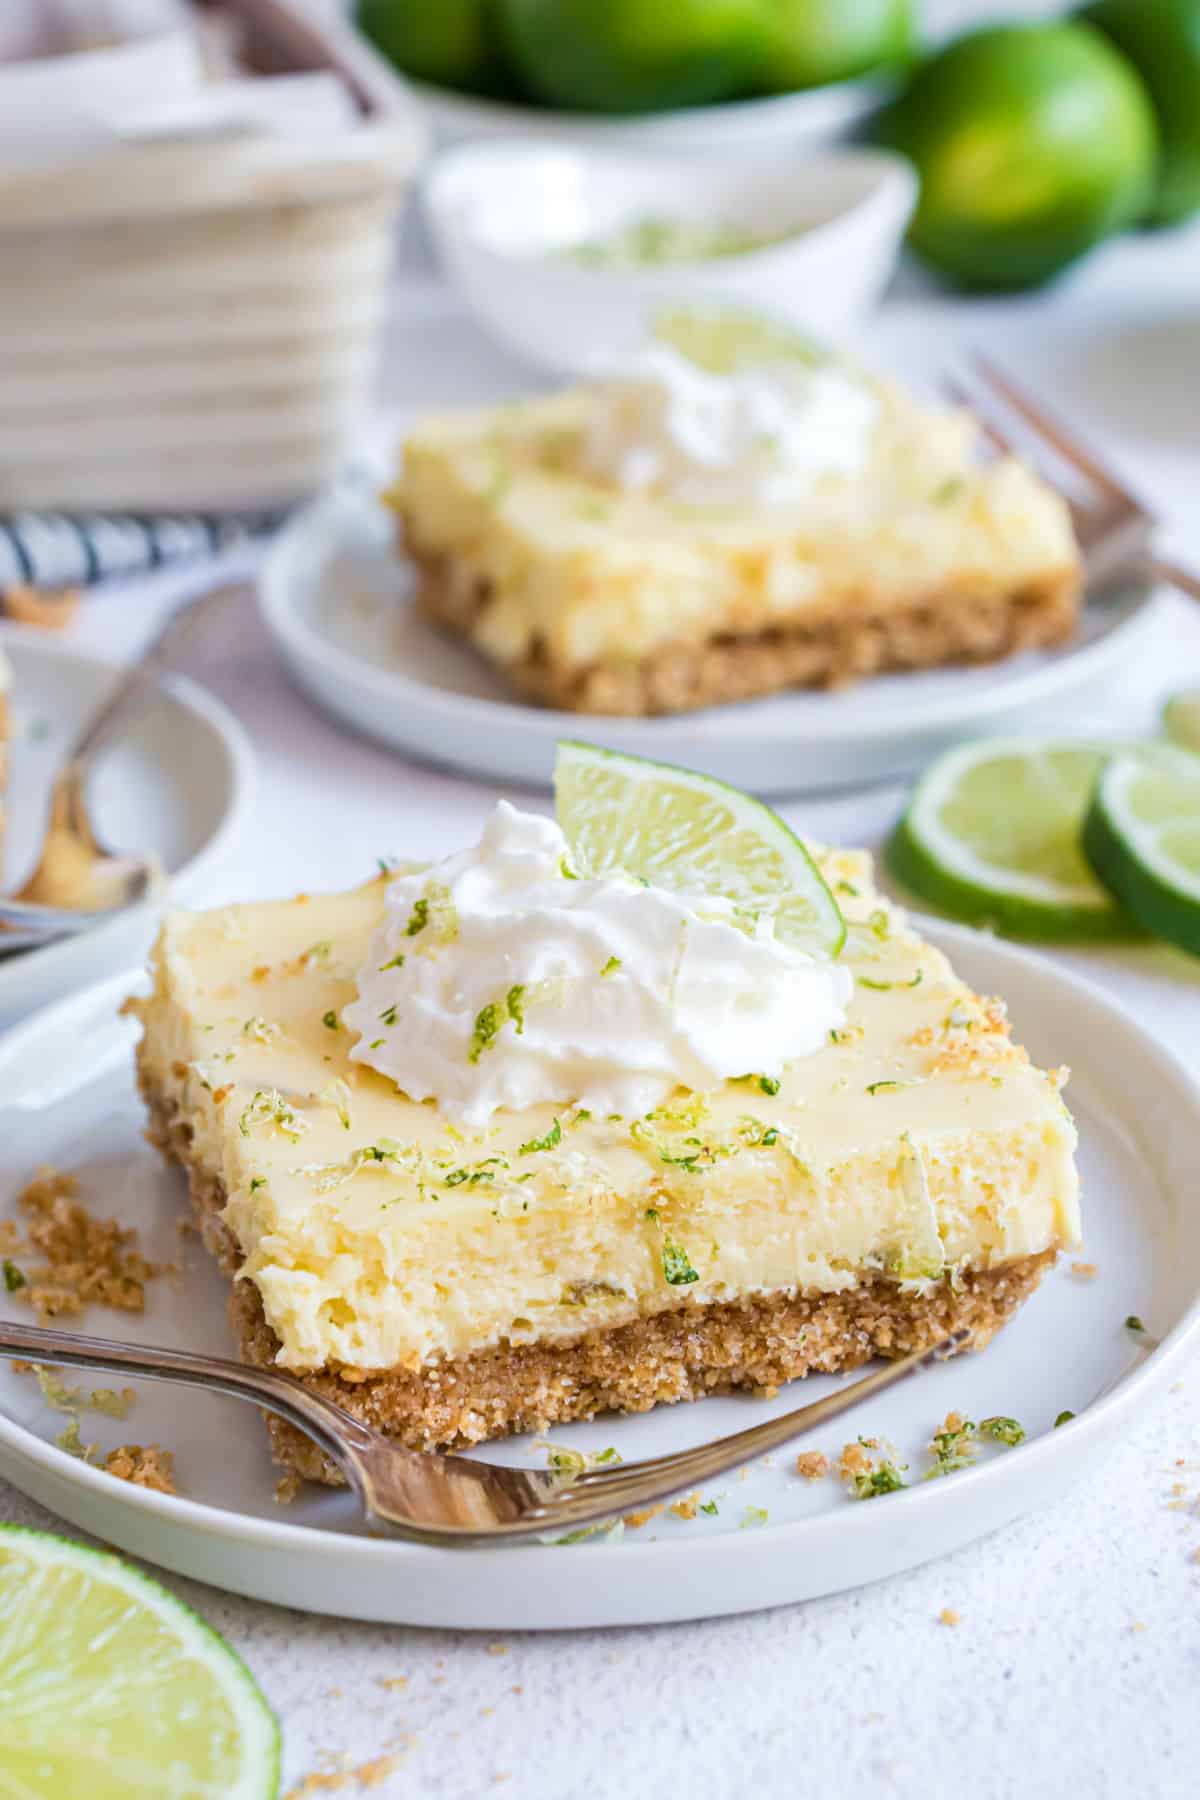 Key lime pie bars on white plates and garnished with whipped cream.